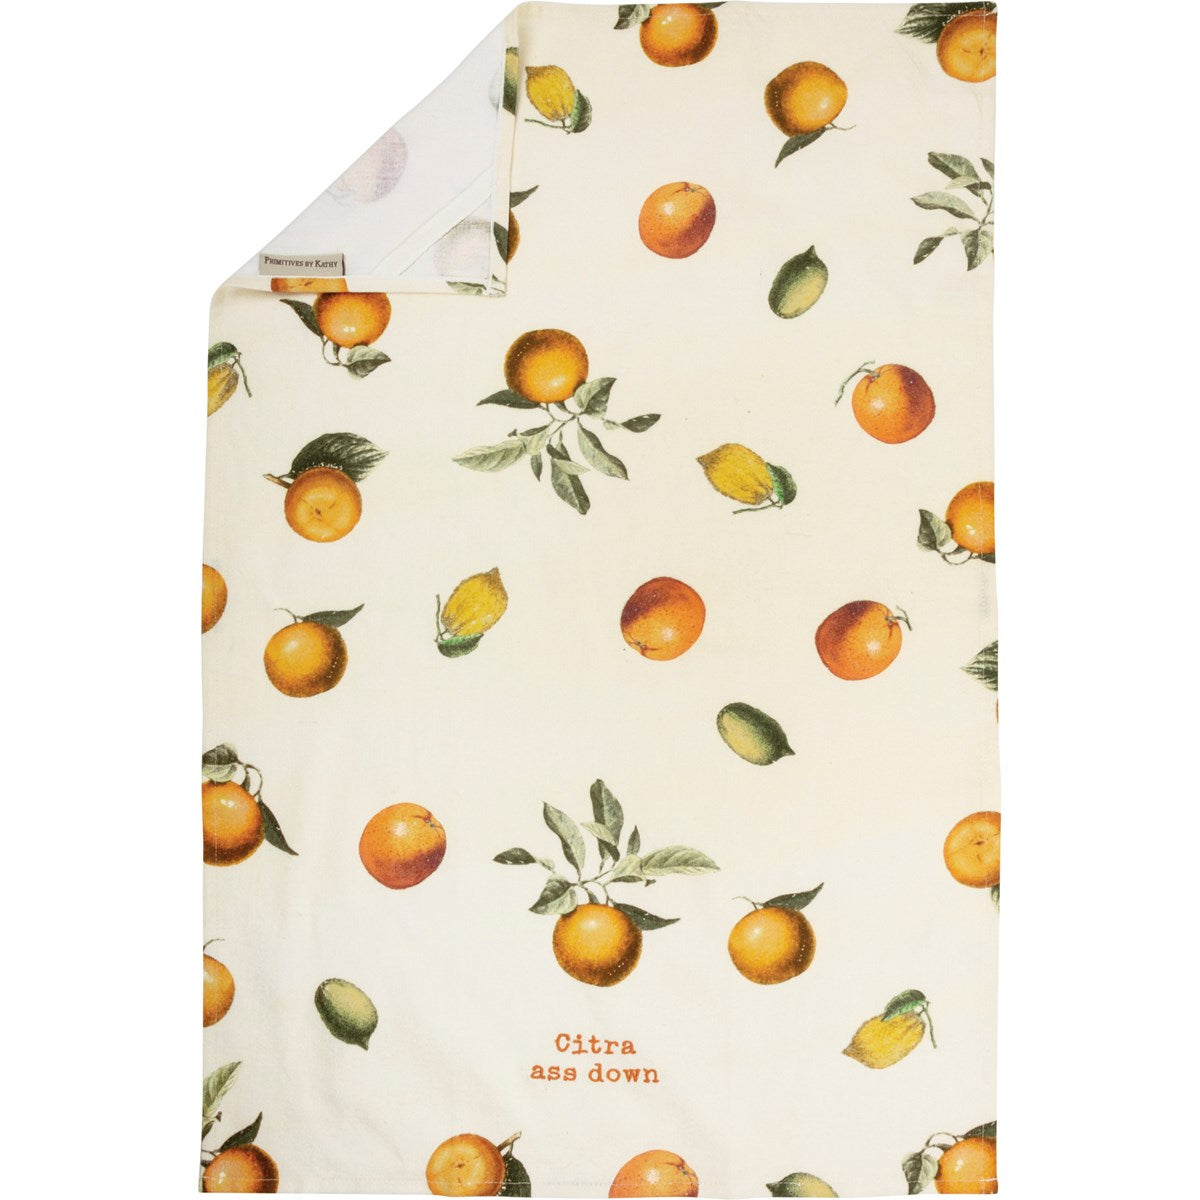 ivory towel with all-over vintage-style citrus fruit designs and "Citra Ass Down" embroidered on it.